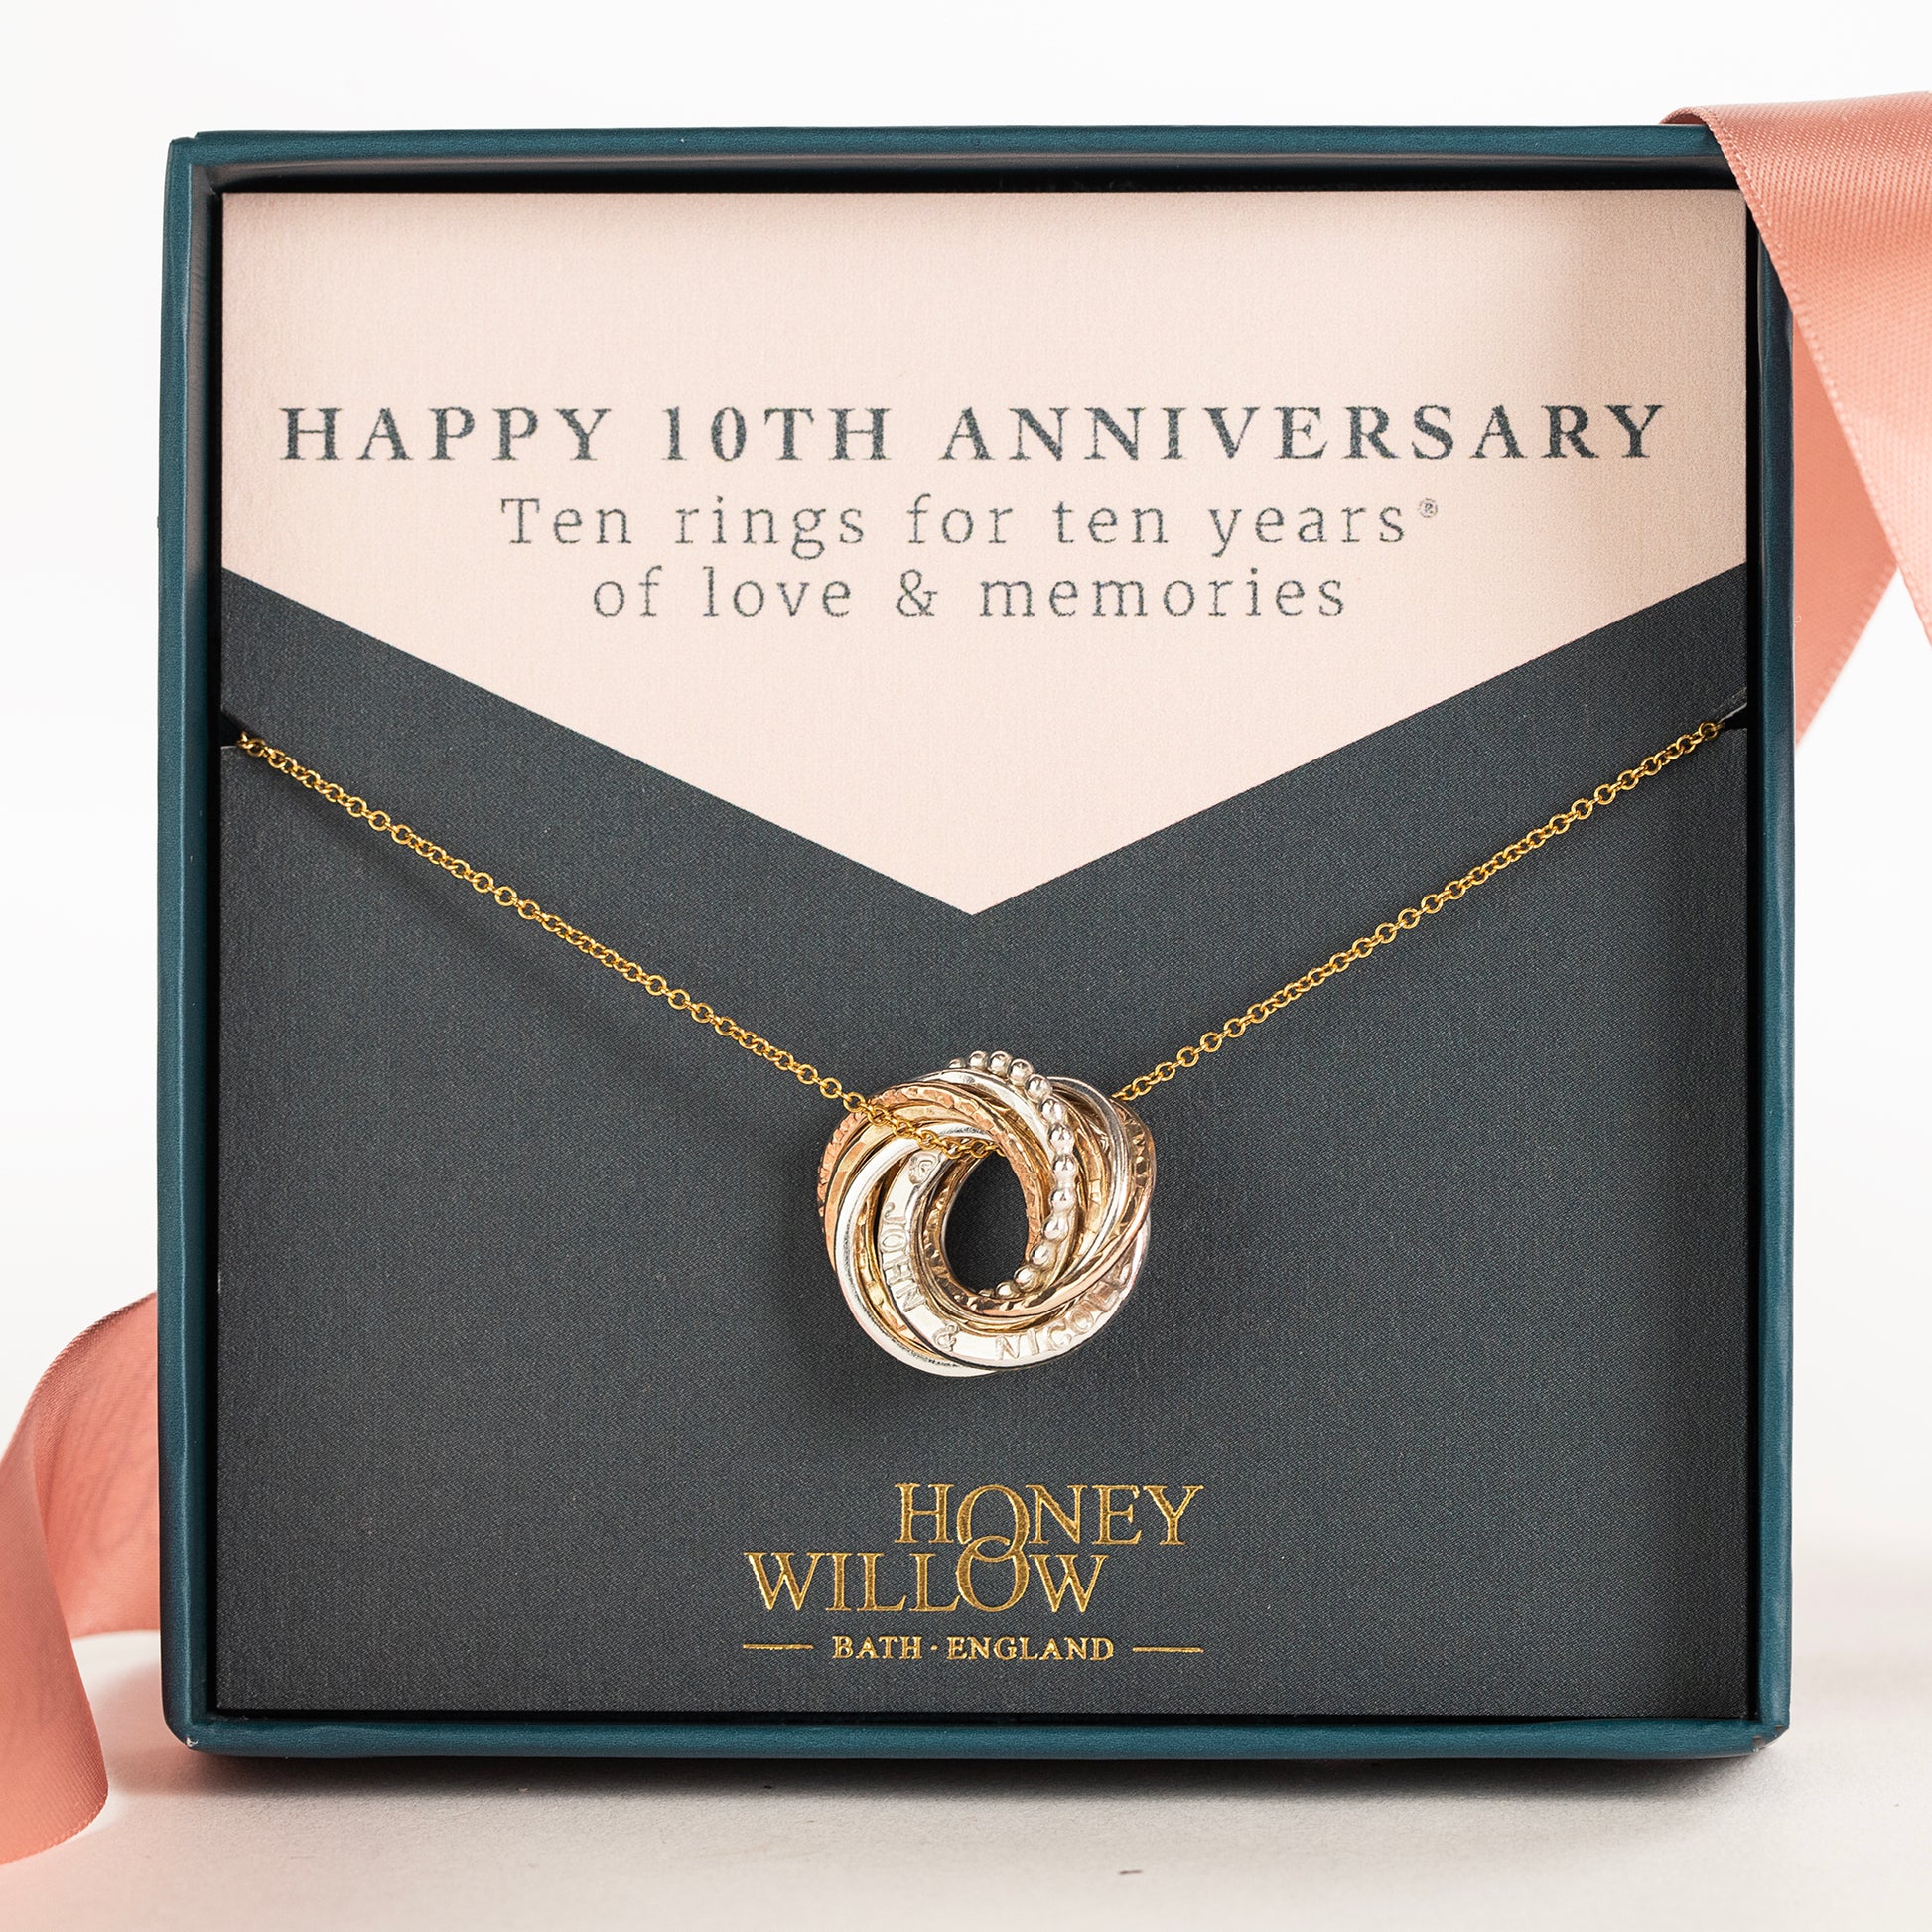 Personalised 10th Anniversary Necklace - The Original 10 Rings for 10 Years Necklace - Petite Silver & Gold